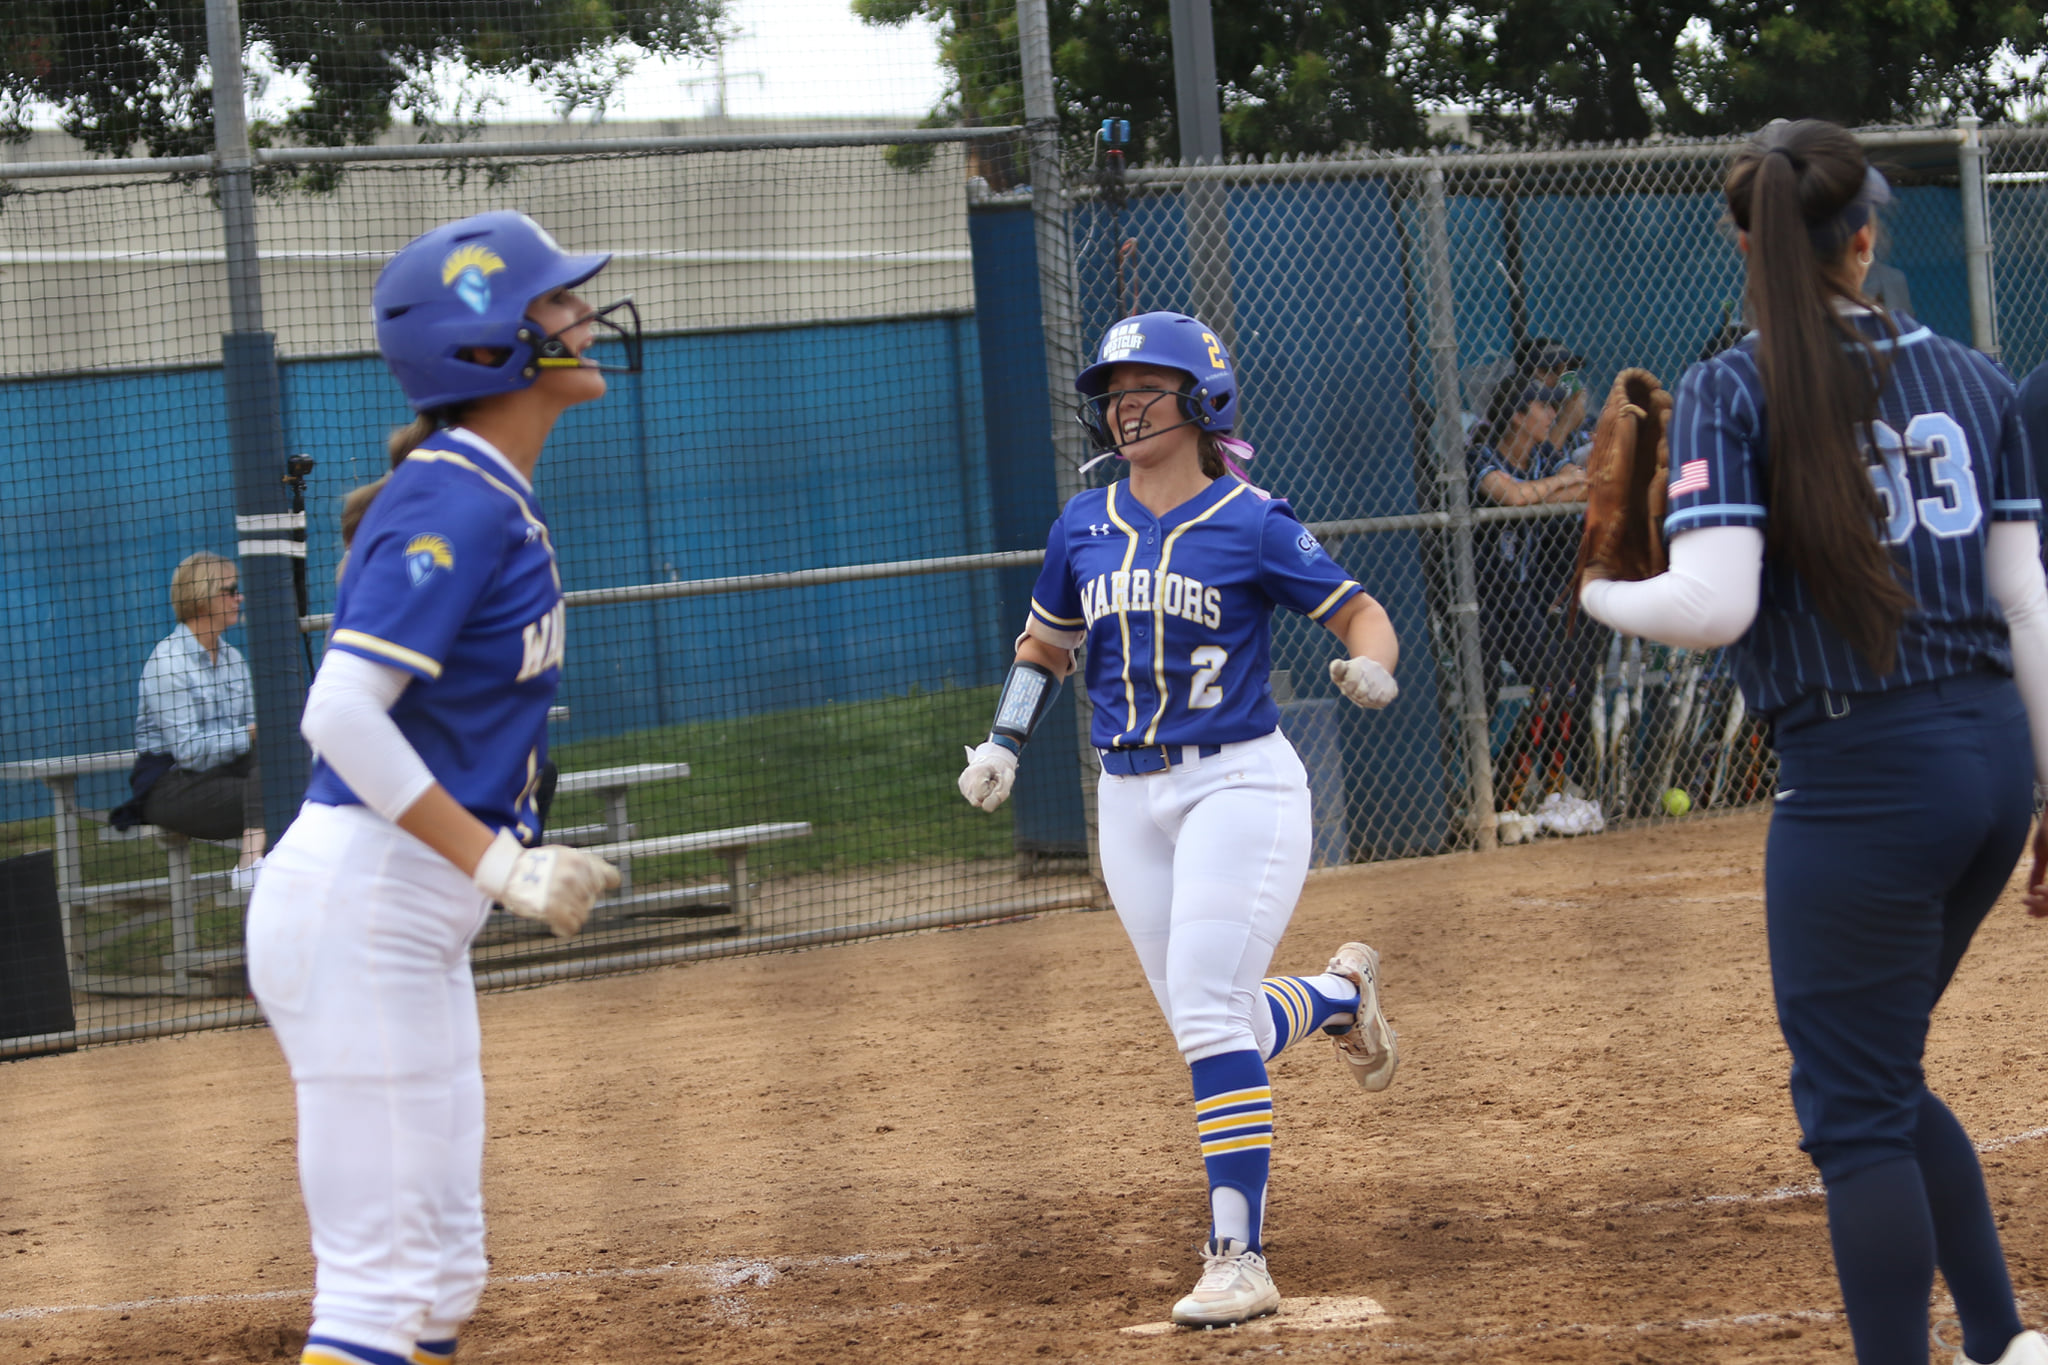 Natalie Ziegler going 5-8 in games 1 and 2 with a Triple and 2 Doubles photo by Adrian Wilson